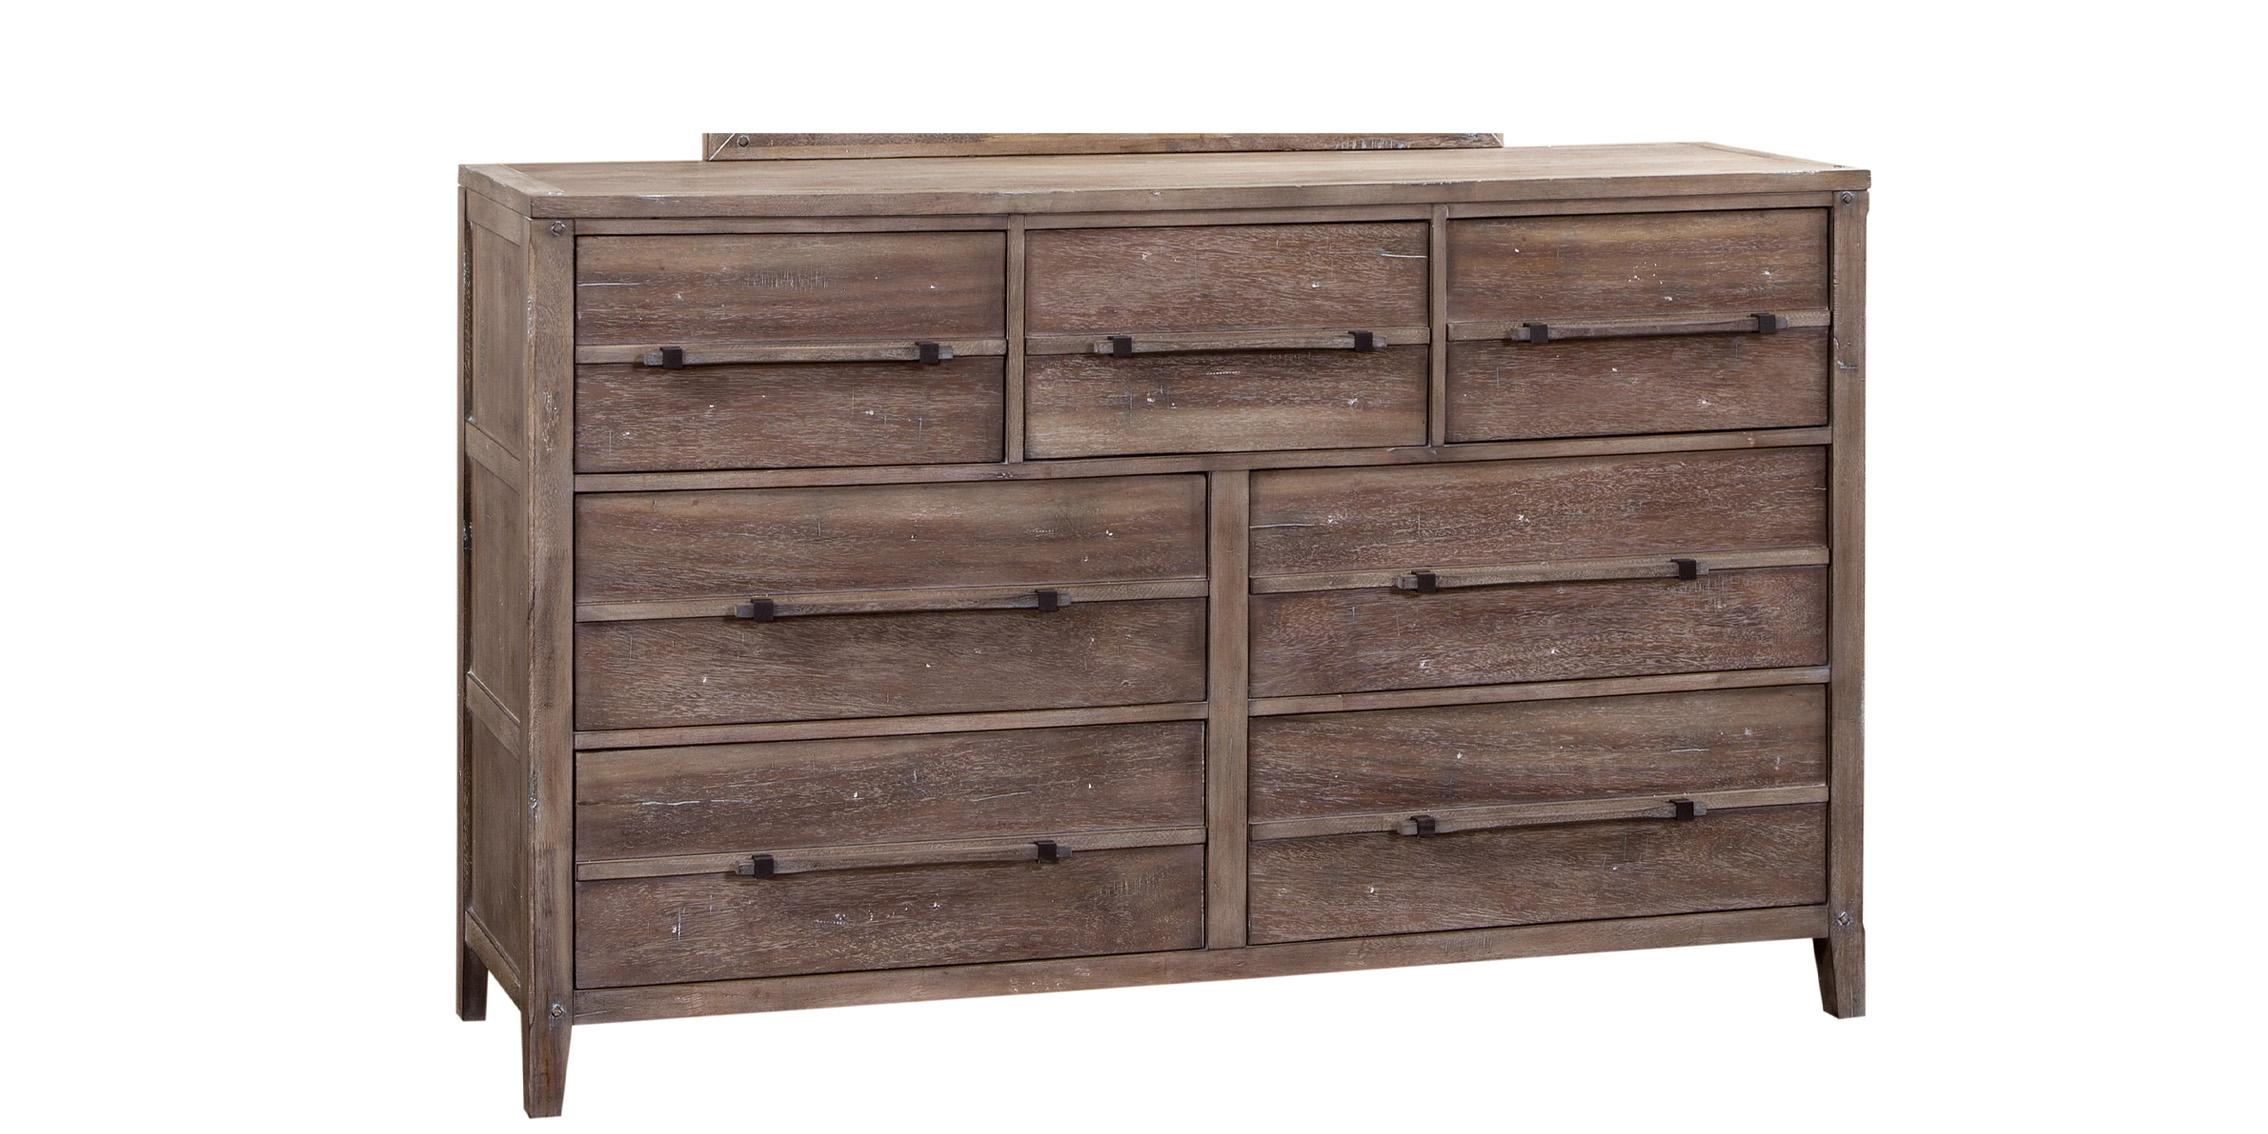 Classic, Traditional Dresser AURORA 2800-270 2800-270 in Driftwood, Gray 